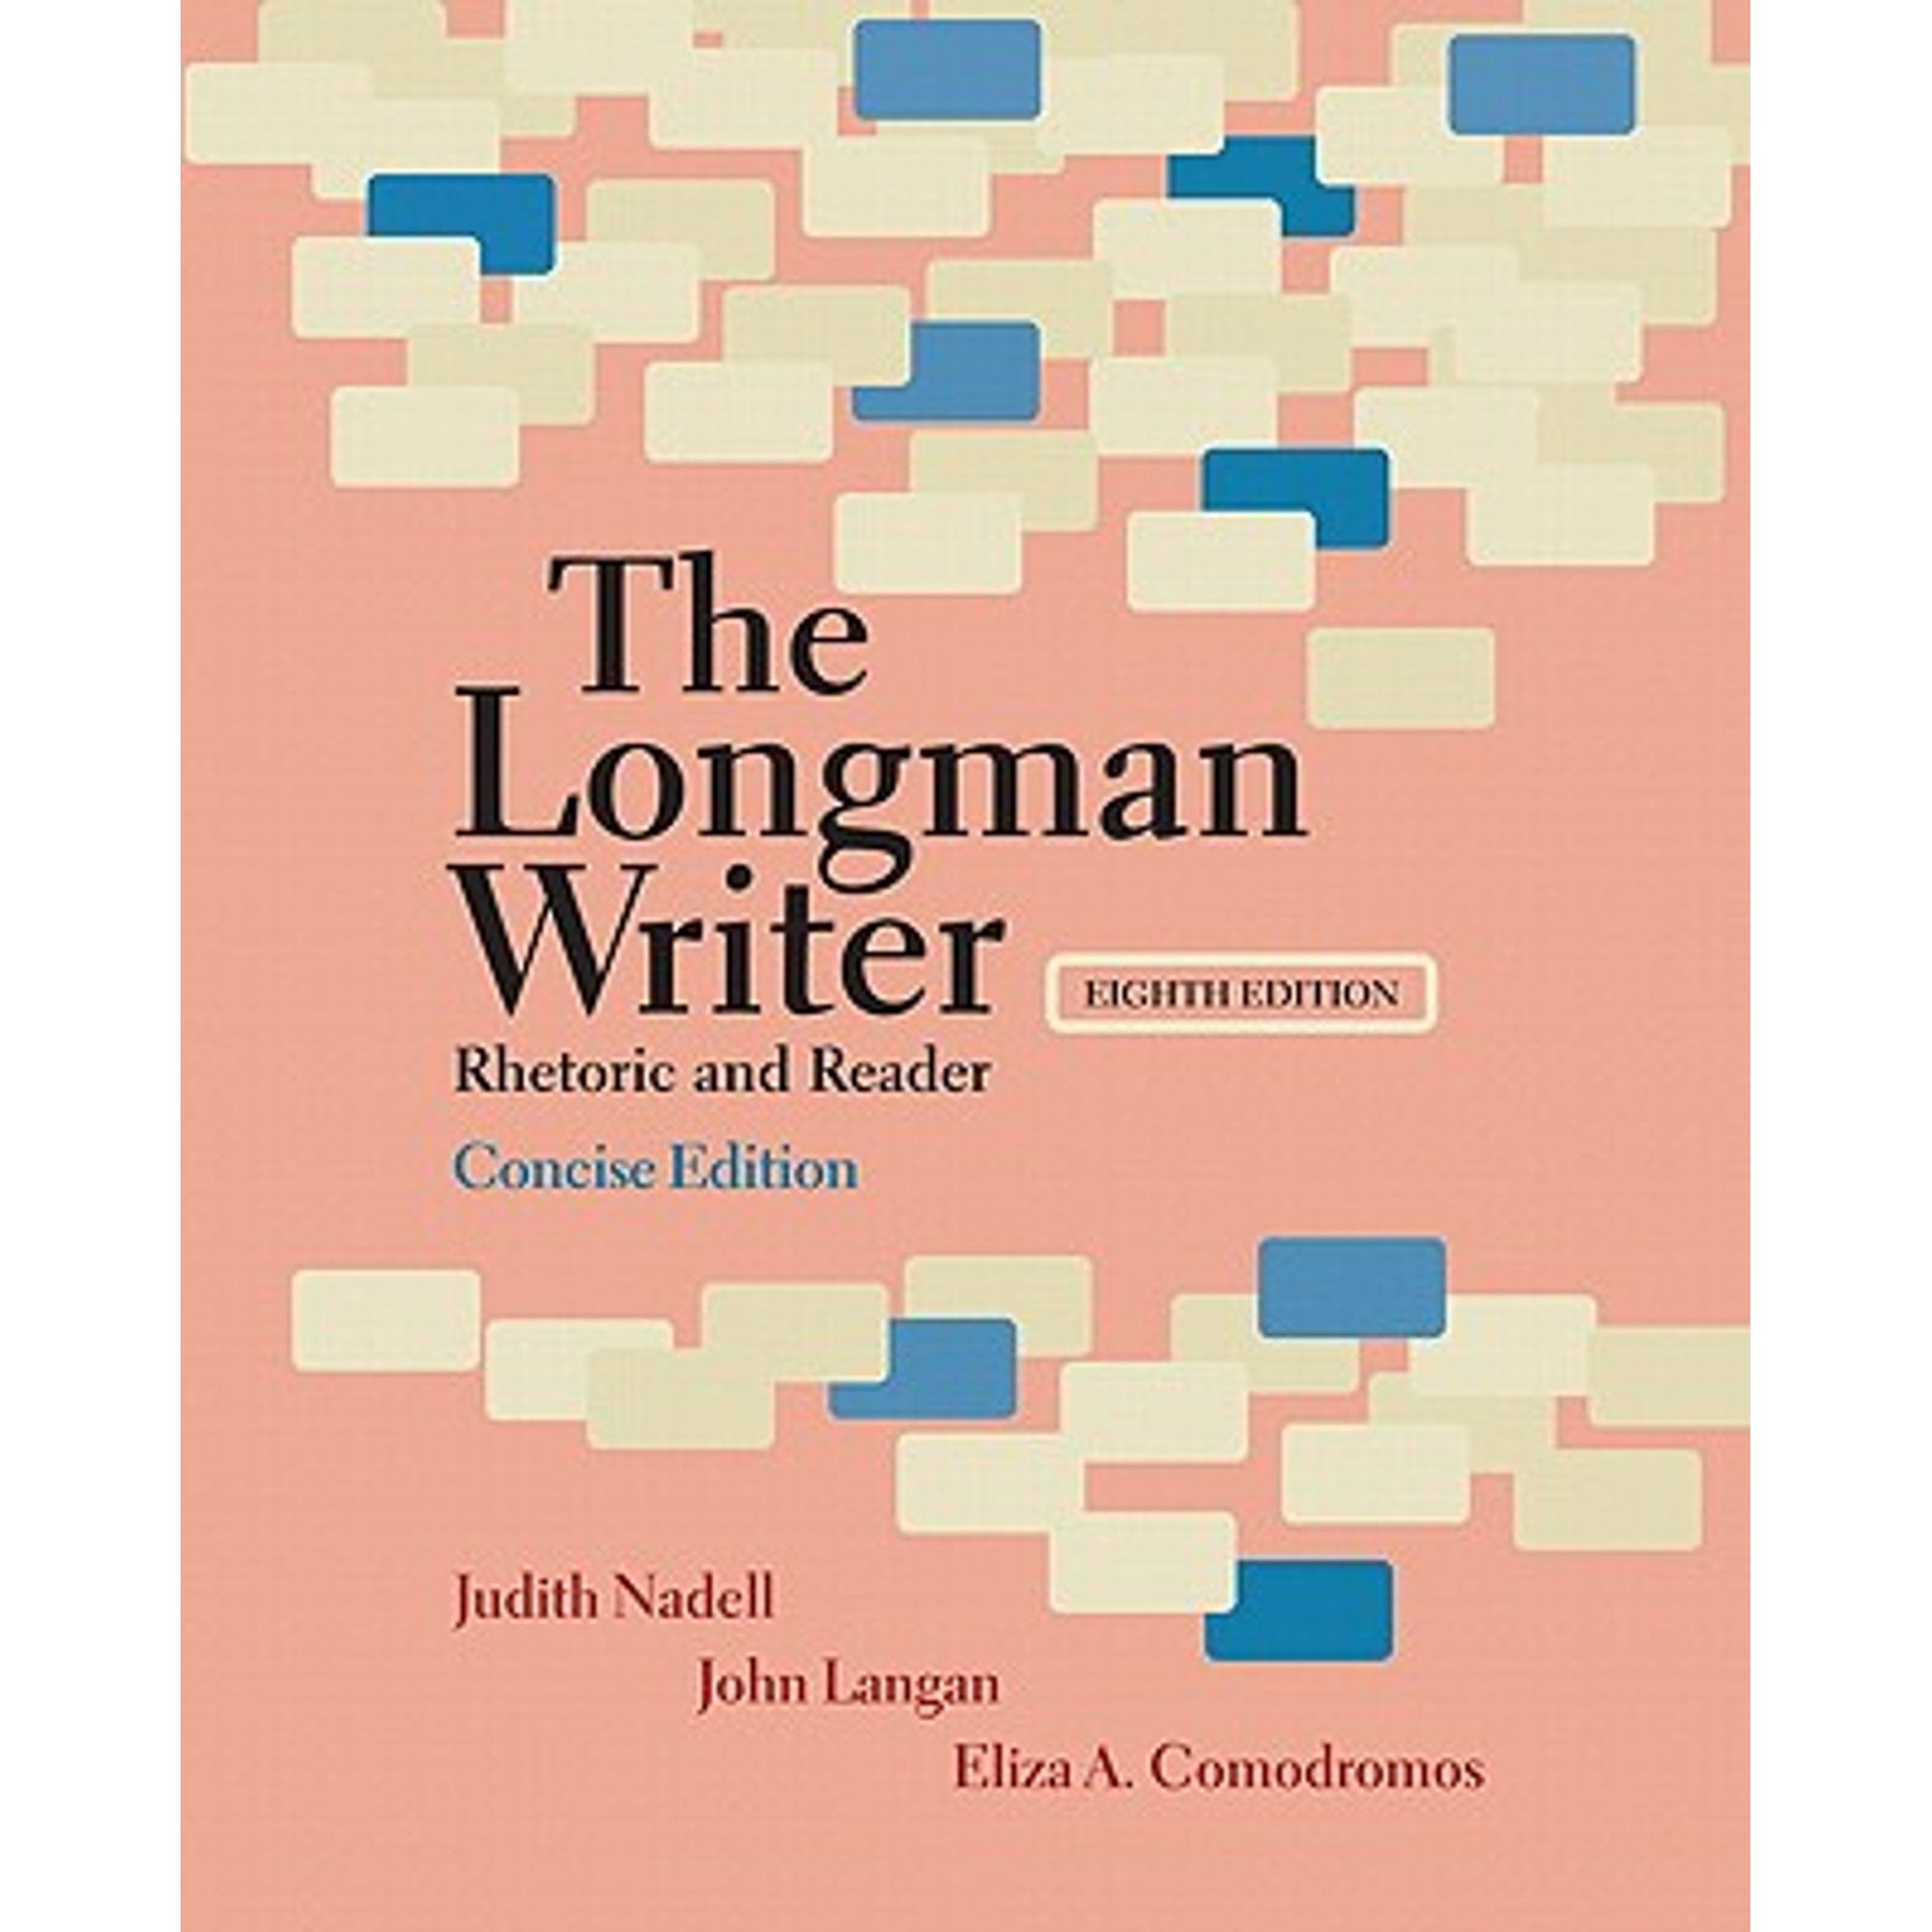 (Pre-Owned　Langan,　by　Comodromos　and　Rhetoric　The,　Nadell,　Reader　Eliza　Concise　John　Edition:　Judith　Paperback　9780205798377)　Longman　Writer,